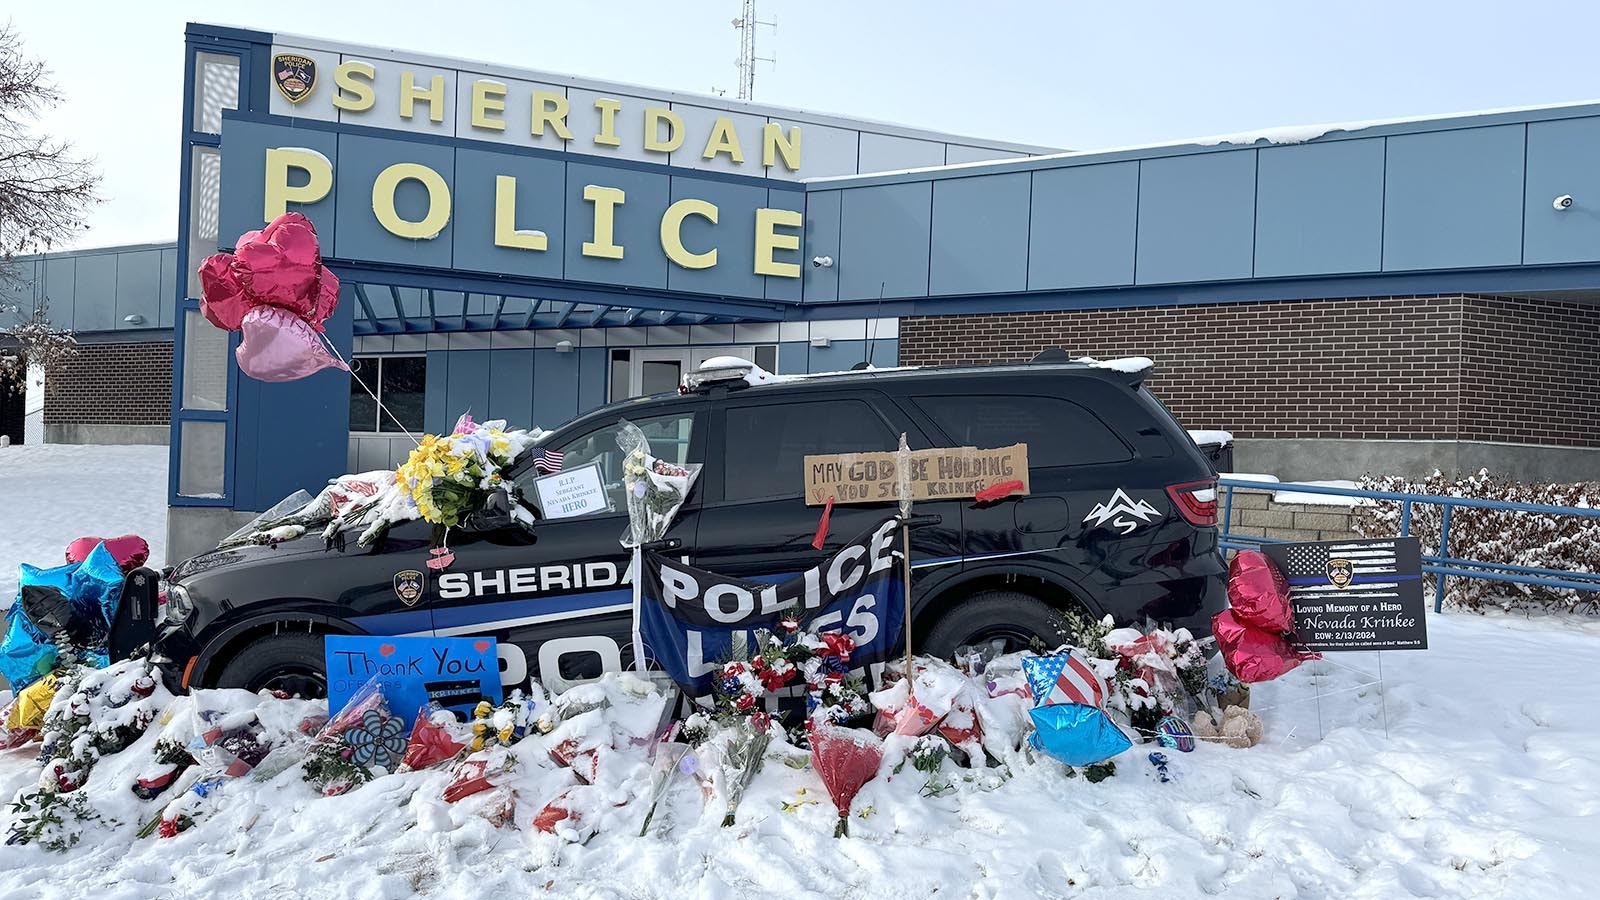 Sgt. Nevada Krinkee's police cruiser is parked in front of the Sheridan Police Department. People have been leaving memorials and messages to the officer who was killed in the line of duty Tuesday.